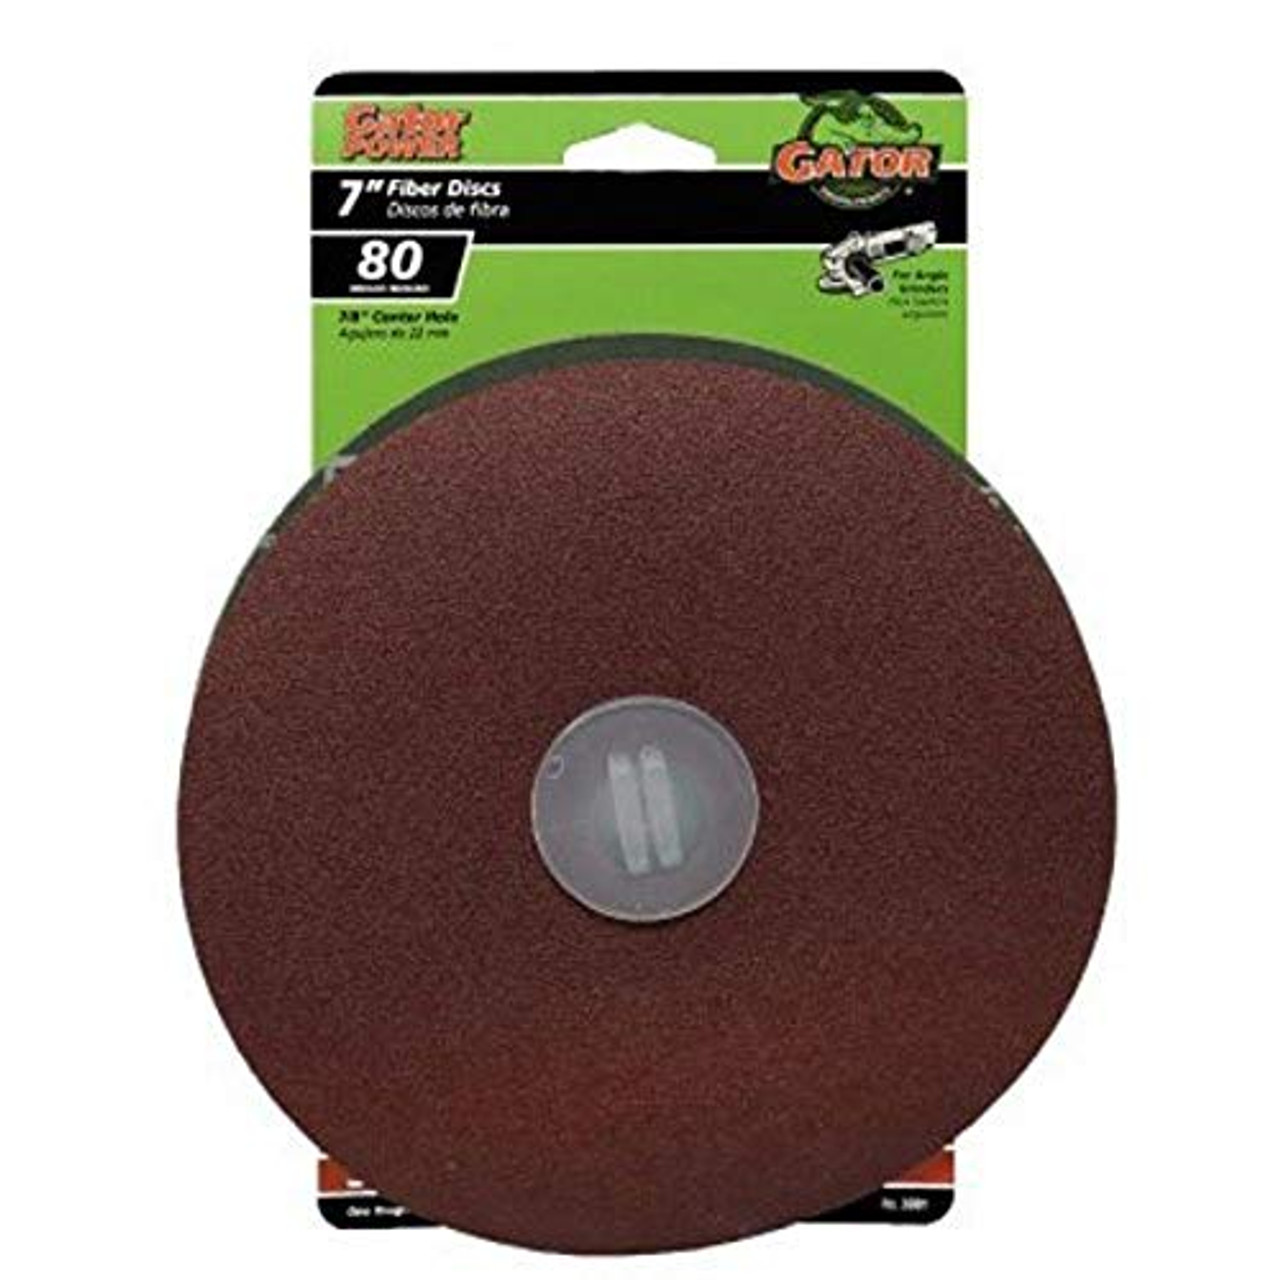 Gator 3081 80 25 CT Grit Sanding Disc, 7-Inch x 7/8-Inch, 3-Pack